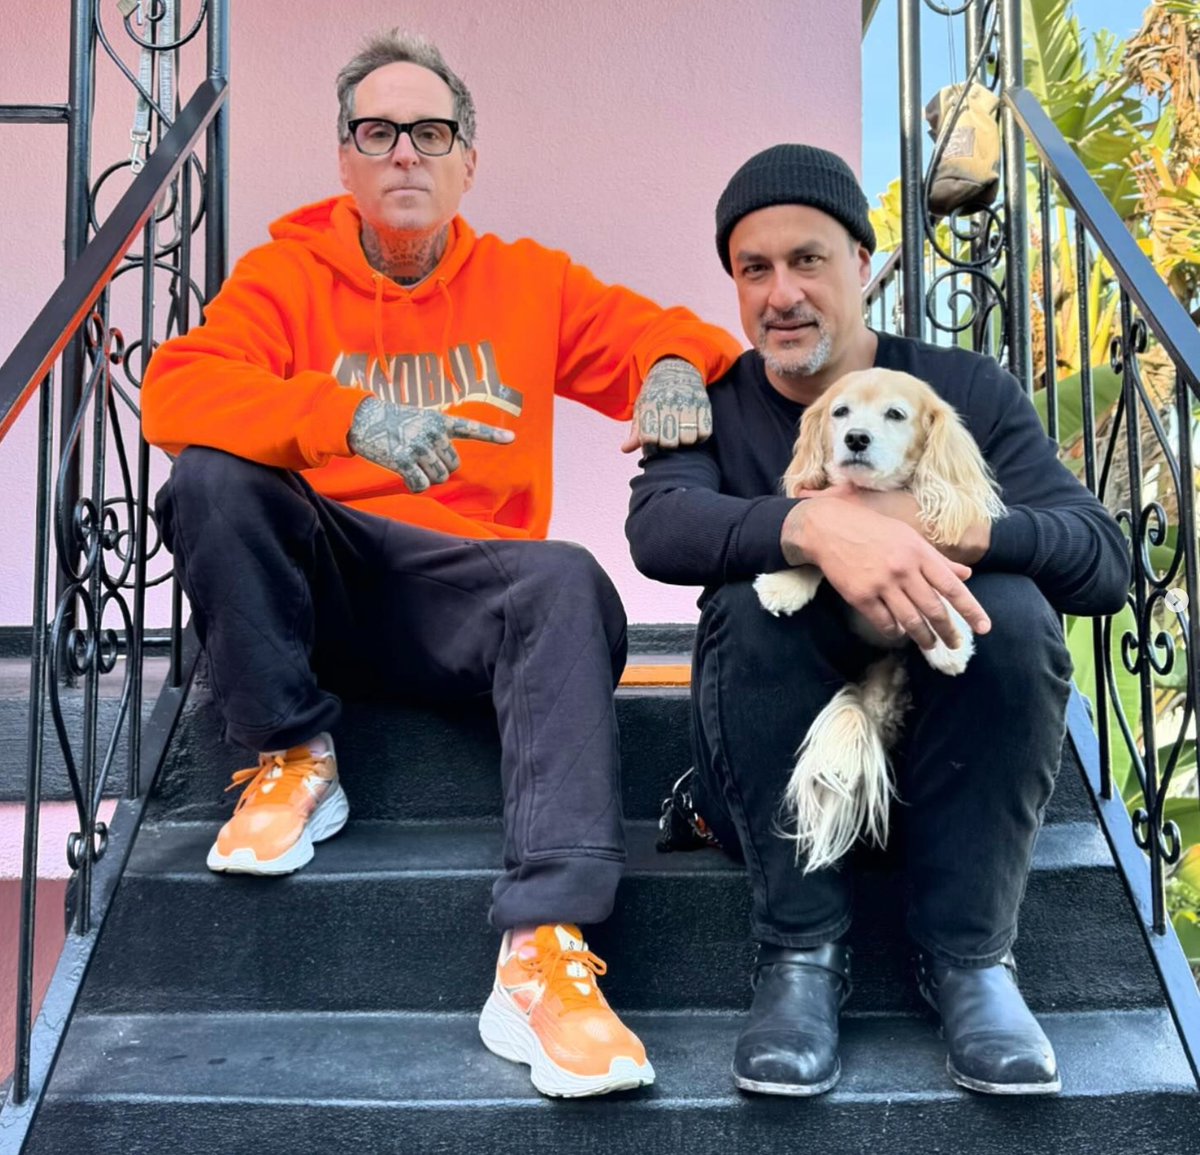 I really just wanted to ride up and tell Toby Morse how rad I thought he was. We talked about Jimmy Gestapo , stage shoes , frontside rocks and I ended up falling in love with Stella ❤️❤️❤️ Check out the new One Life One Chance podcast with Jason Cruz .. onelifeonechance.com/oloc-podcast/